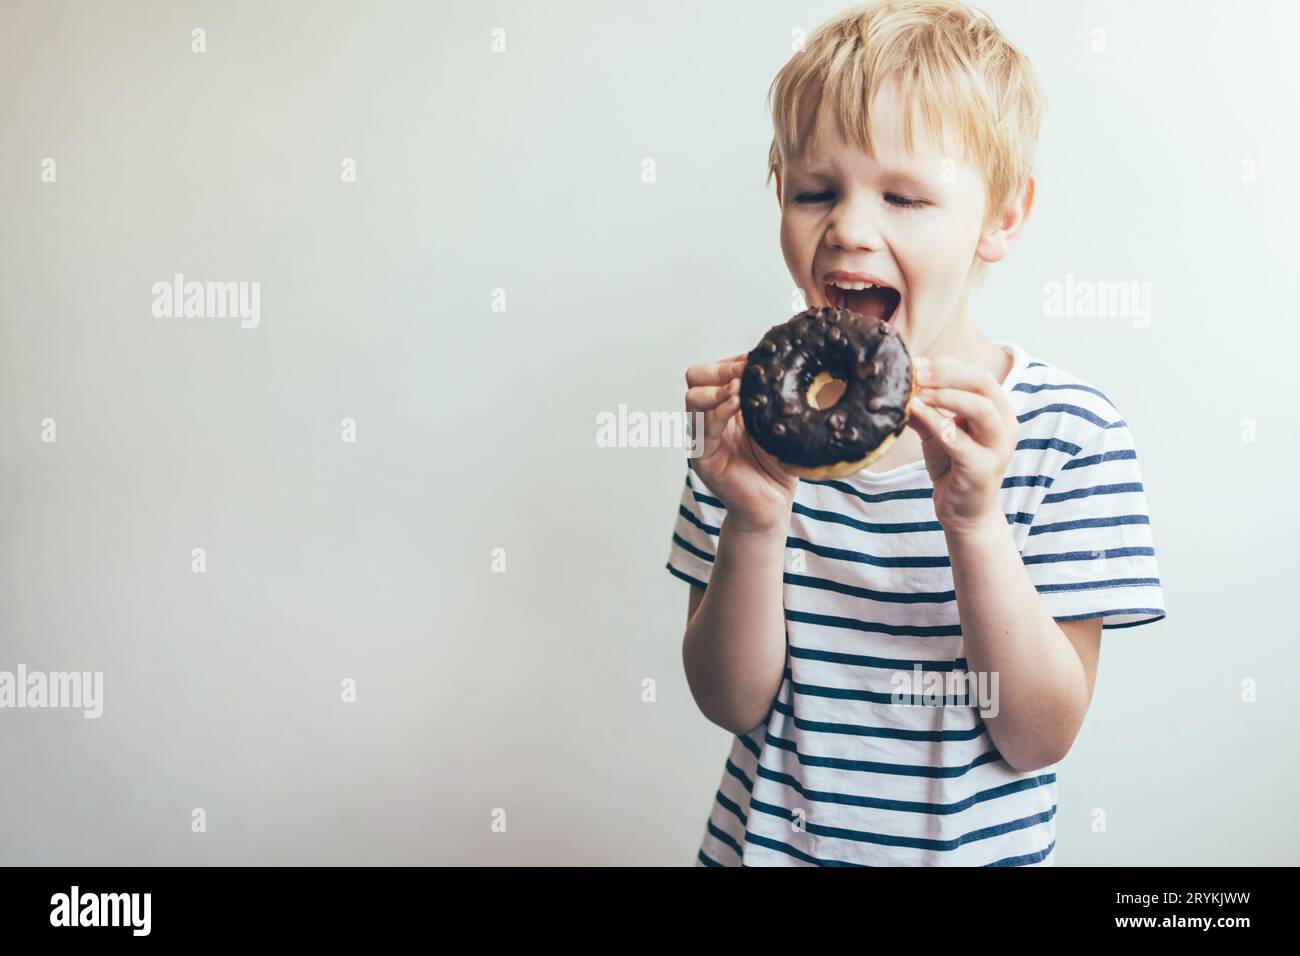 Teen boy bites a chocolate donut. Funny portrait of a child. Stock Photo